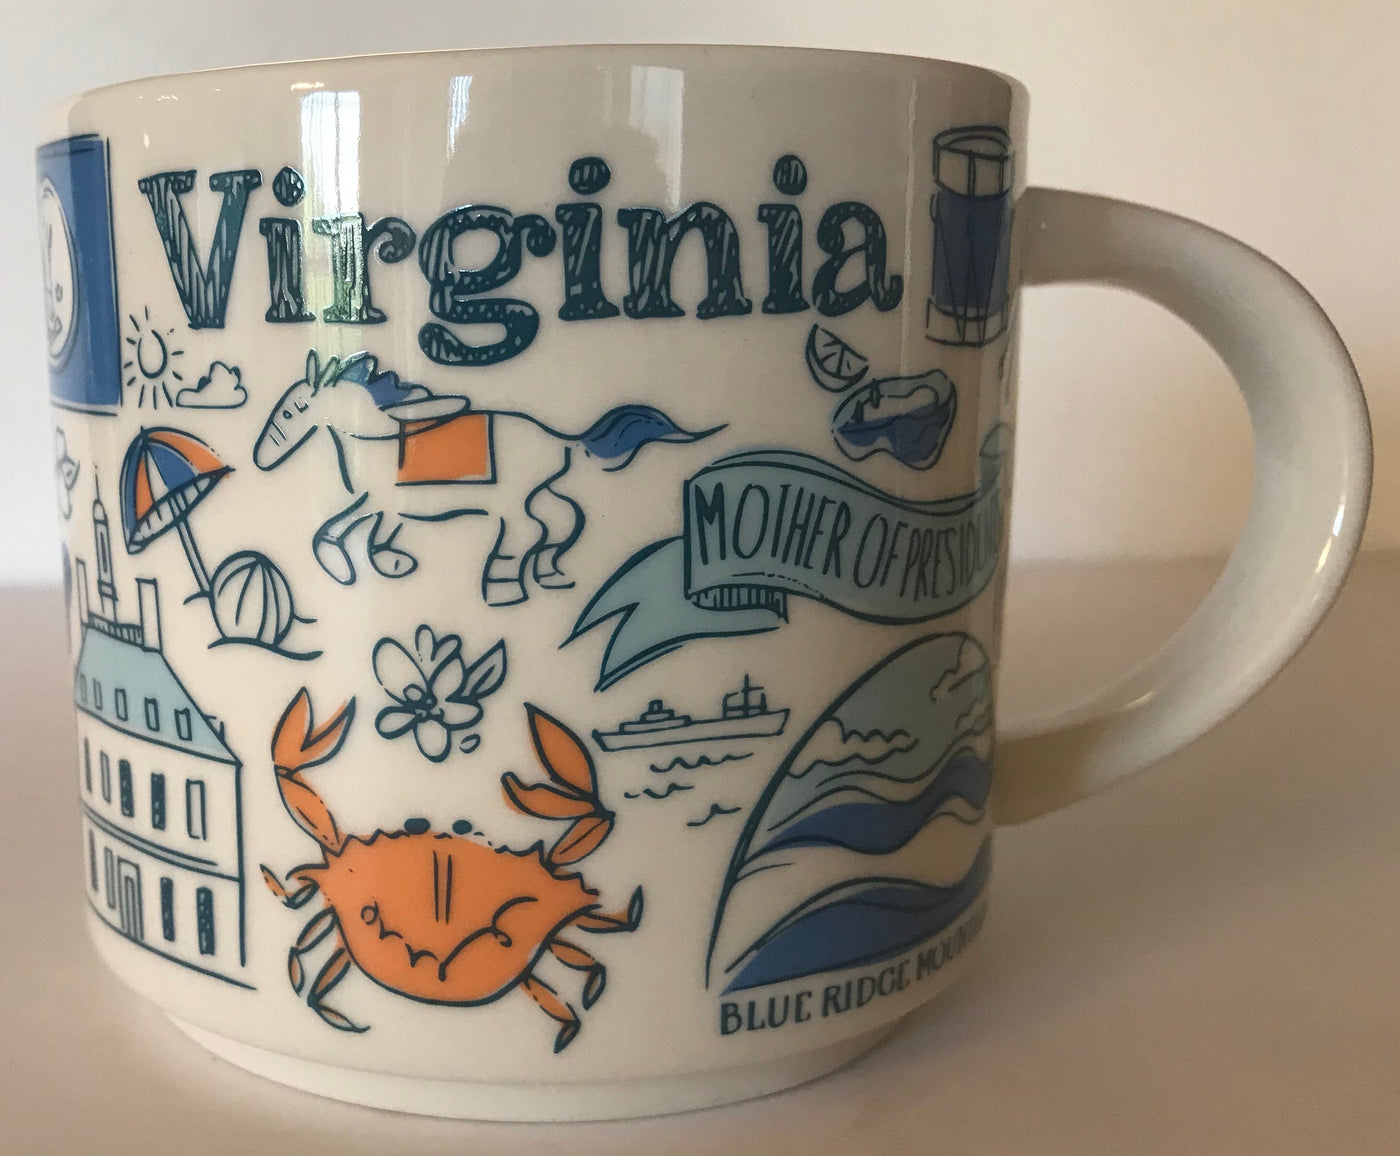 Starbucks Been There Series Collection Virginia Coffee Mug New With Box